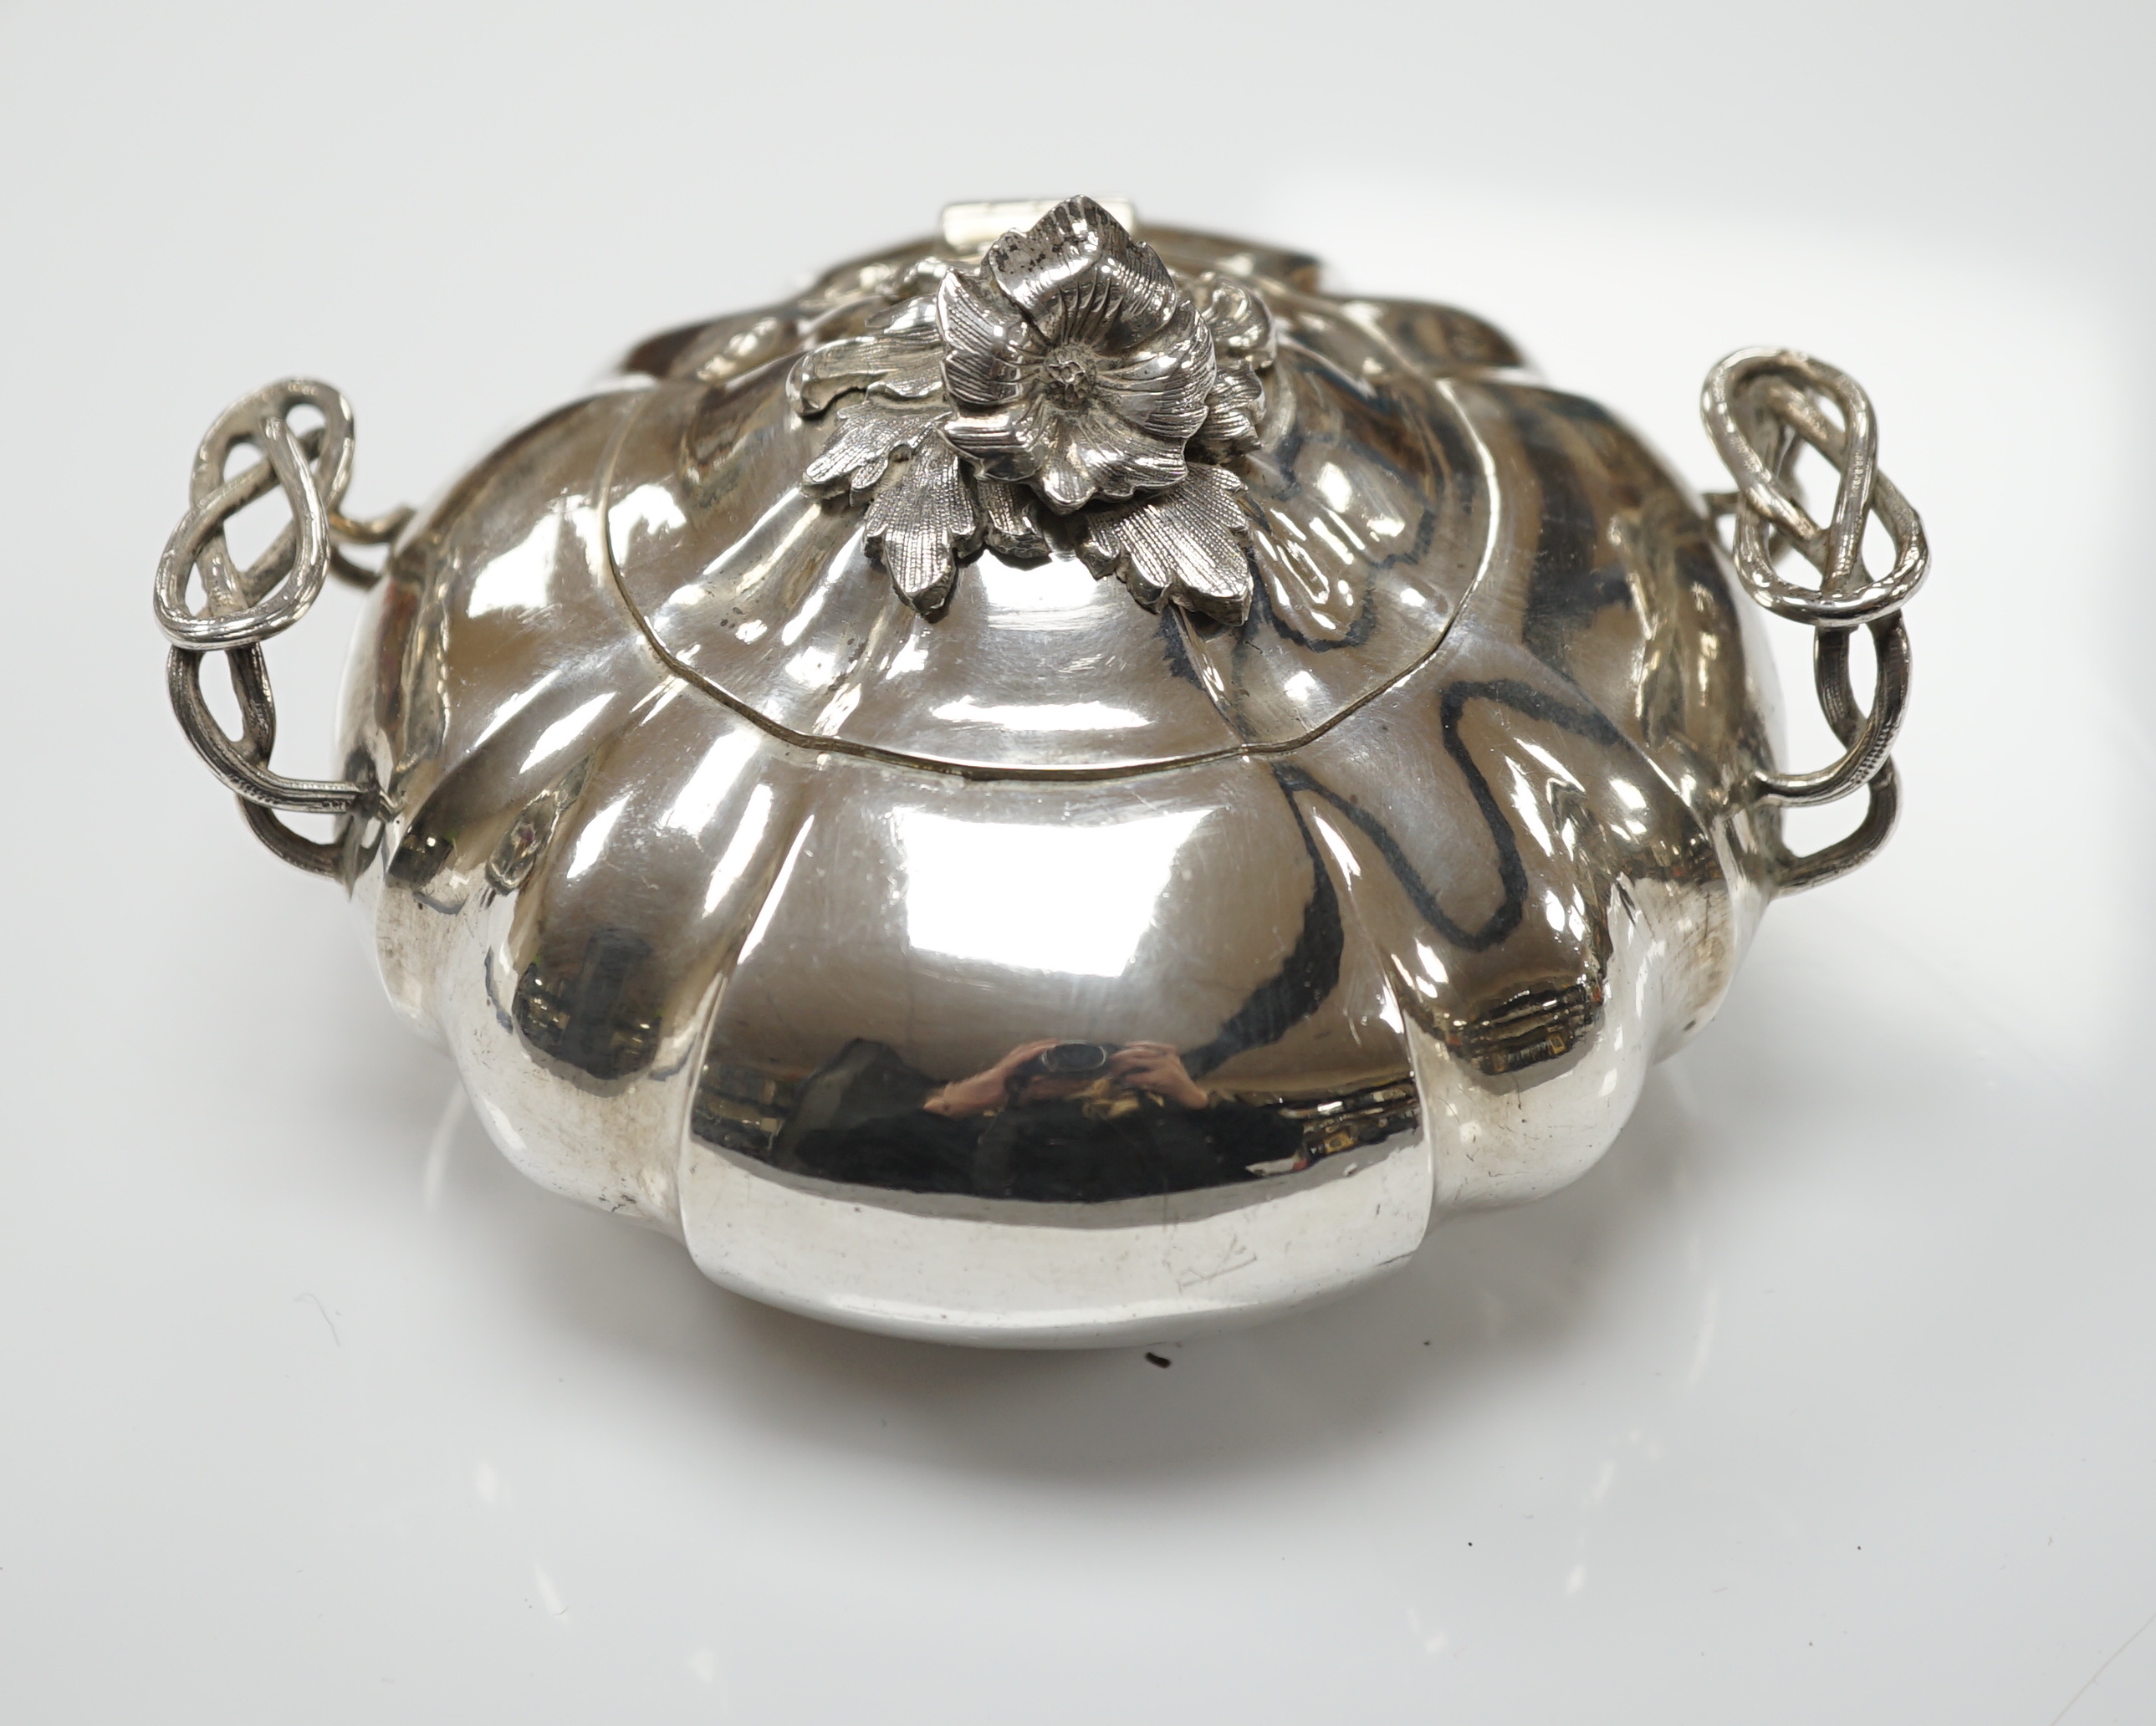 A mid 19th century Russian 84 zolotnik two handle sugar bowl and hinged cover, assay master possibly Vasily Surotsov, width over handles, 13.5cm, 10oz.